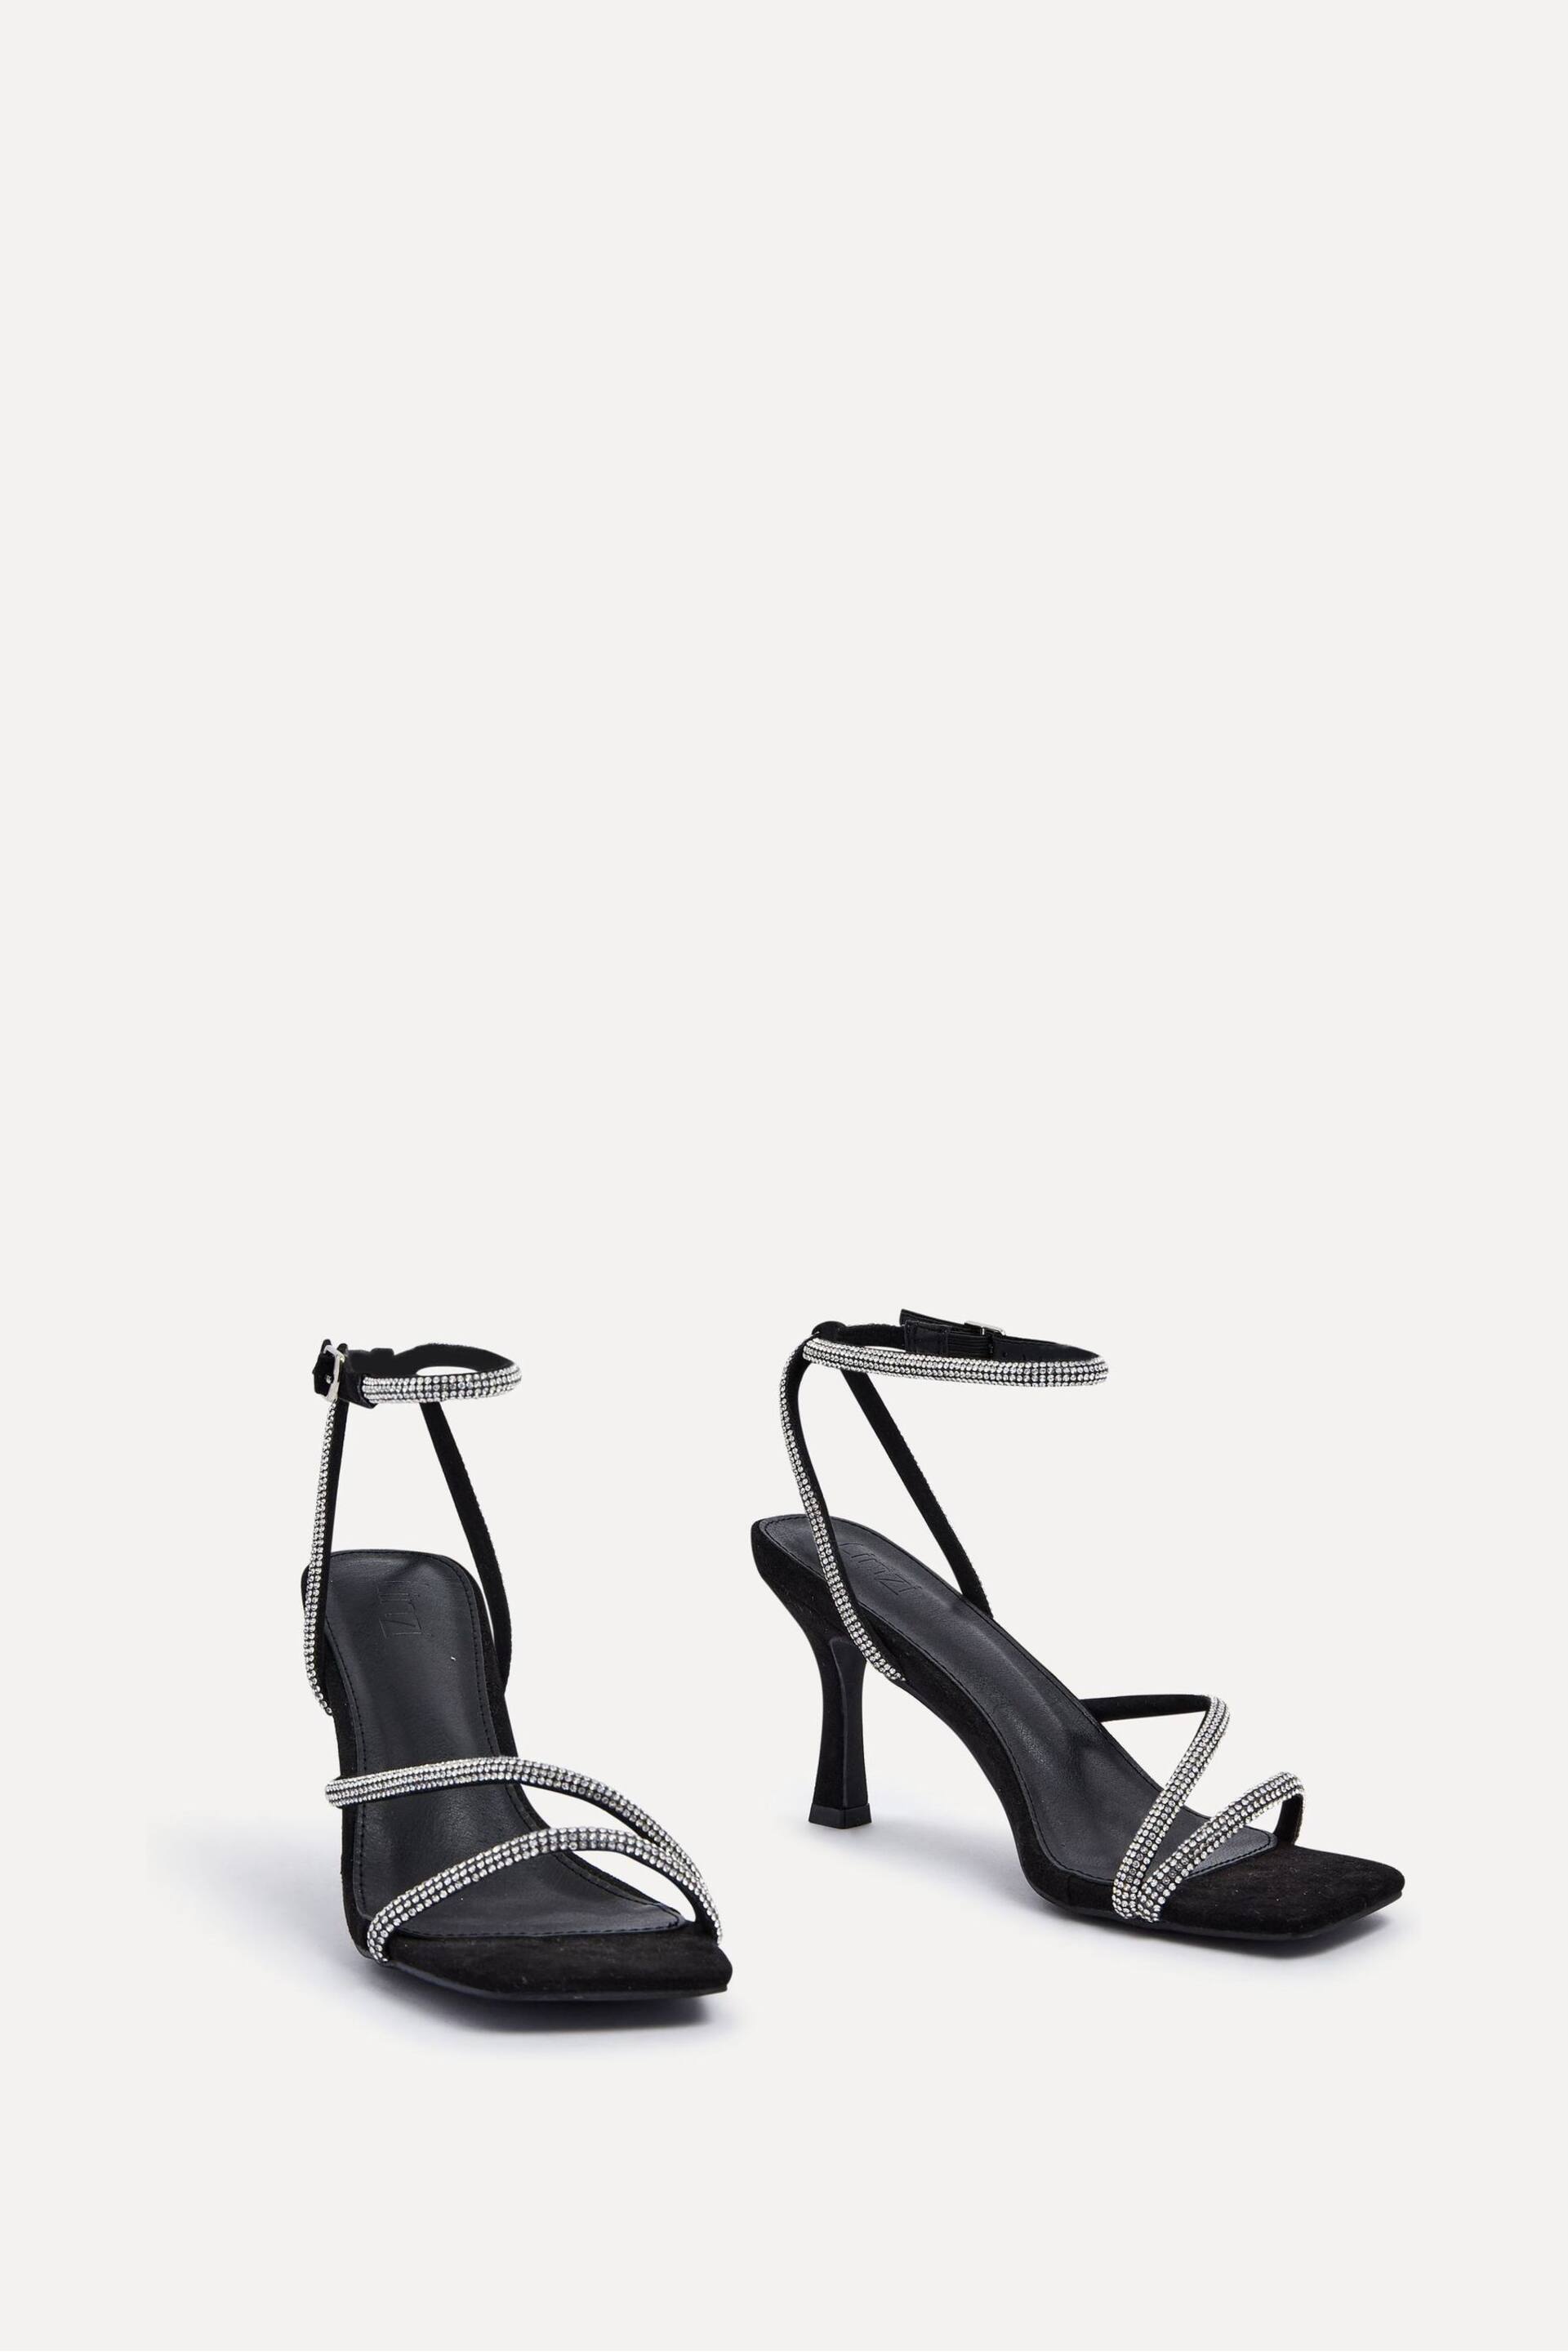 Linzi Black Mayfair Diamante Heeled Sandals With Wrap Around Ankle Strap - Image 3 of 5